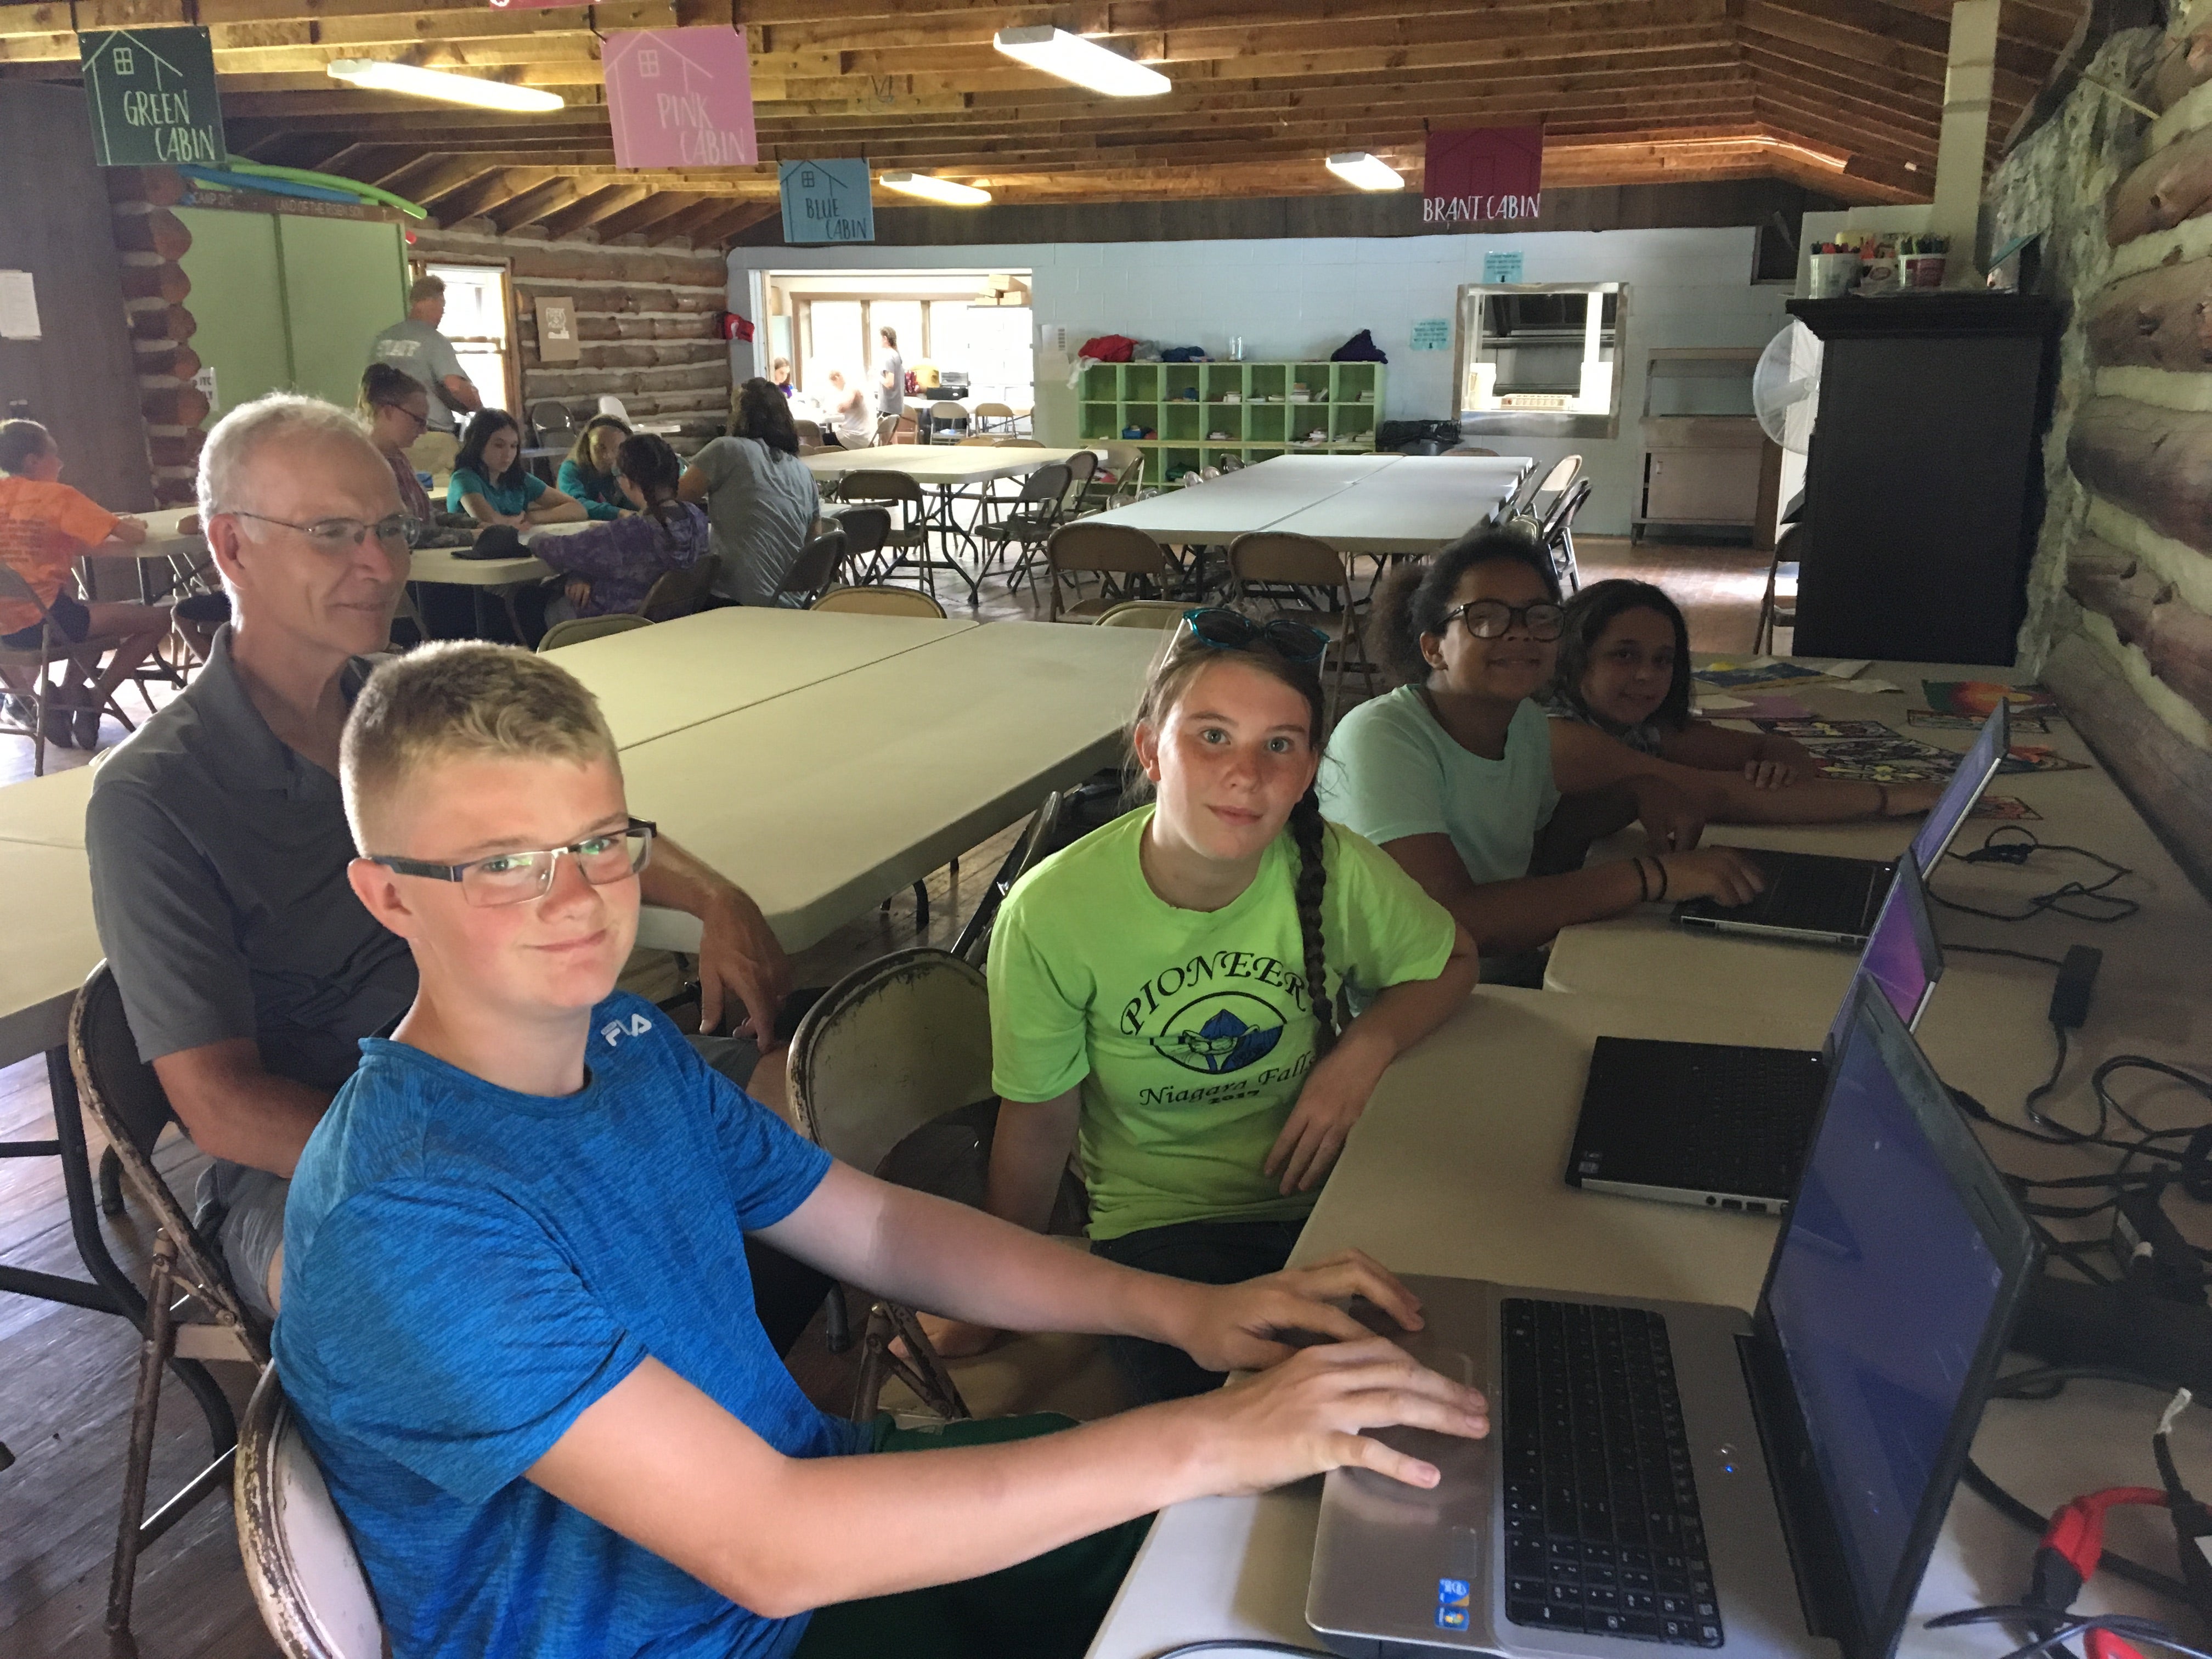 Kids learning Linux on computers